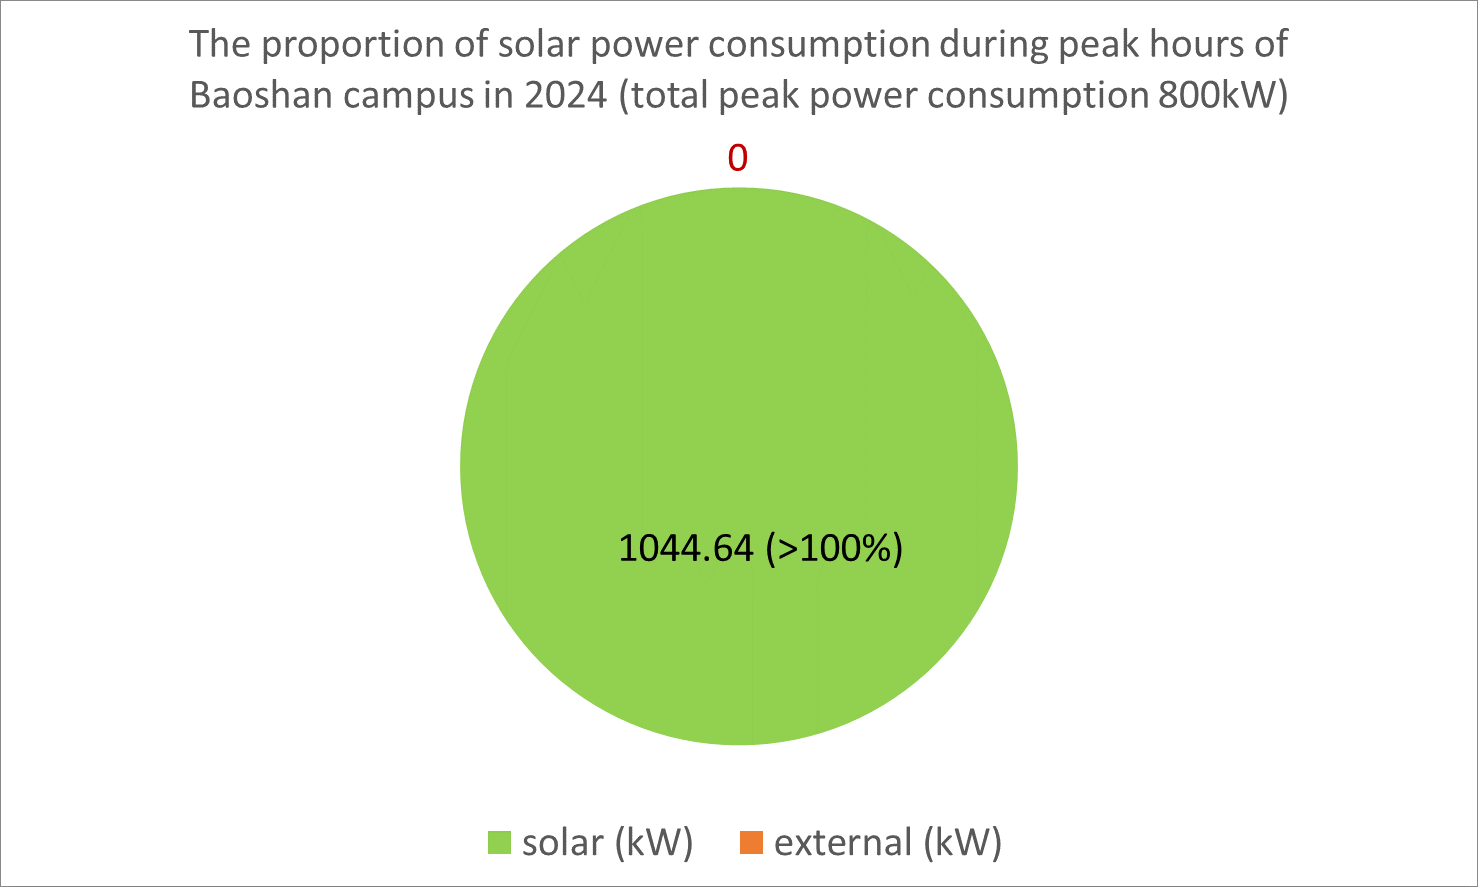 Figure 6. The proportion of solar power consumption during peak hours of the Baoshan campus in 2024